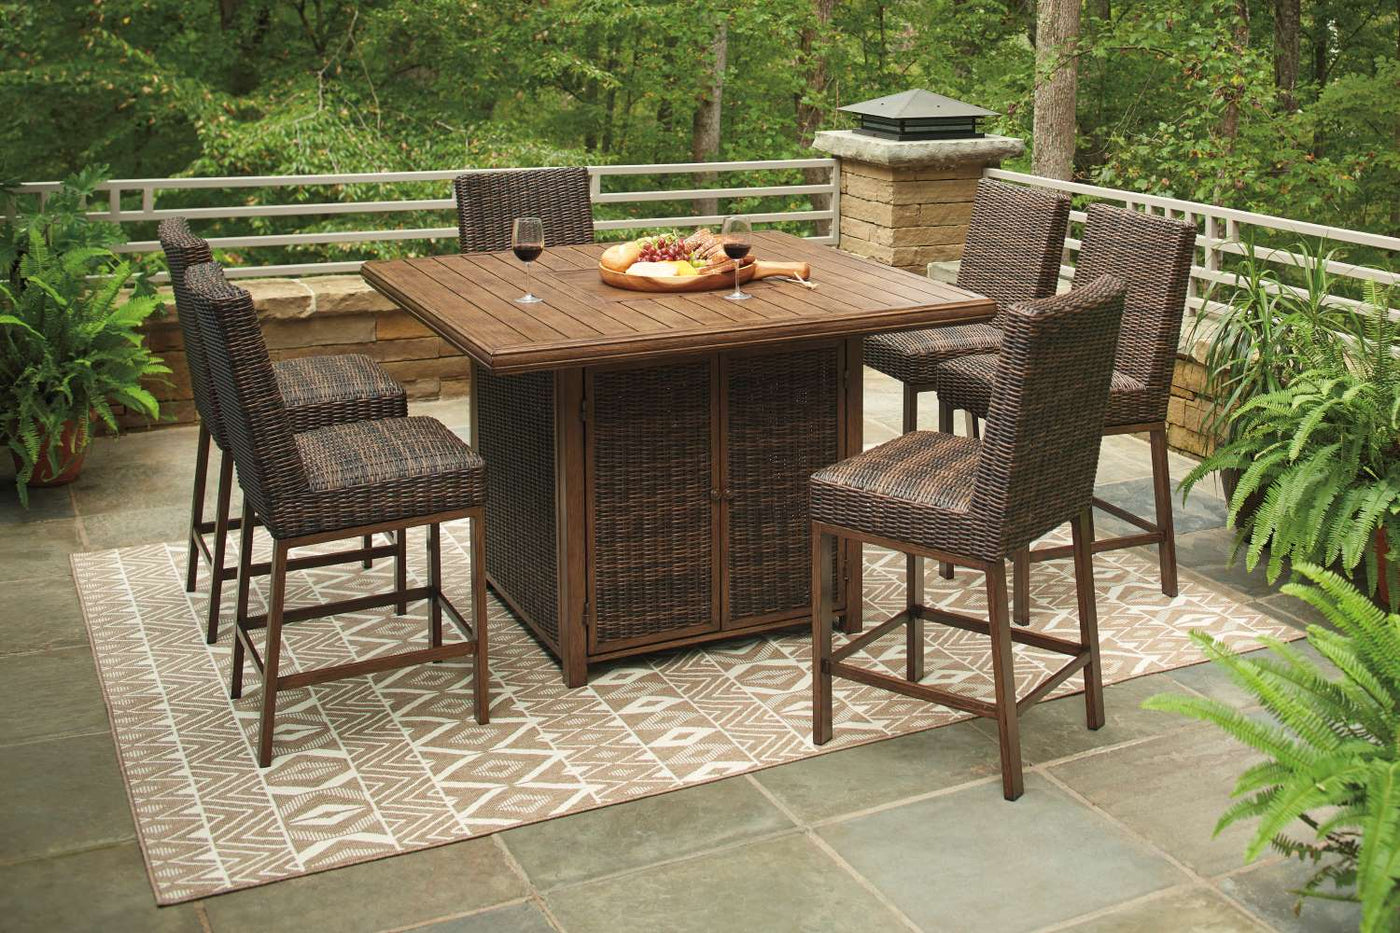 Paradise Trail - Outdoor Bar Height 7-Piece Dining Set - Brown